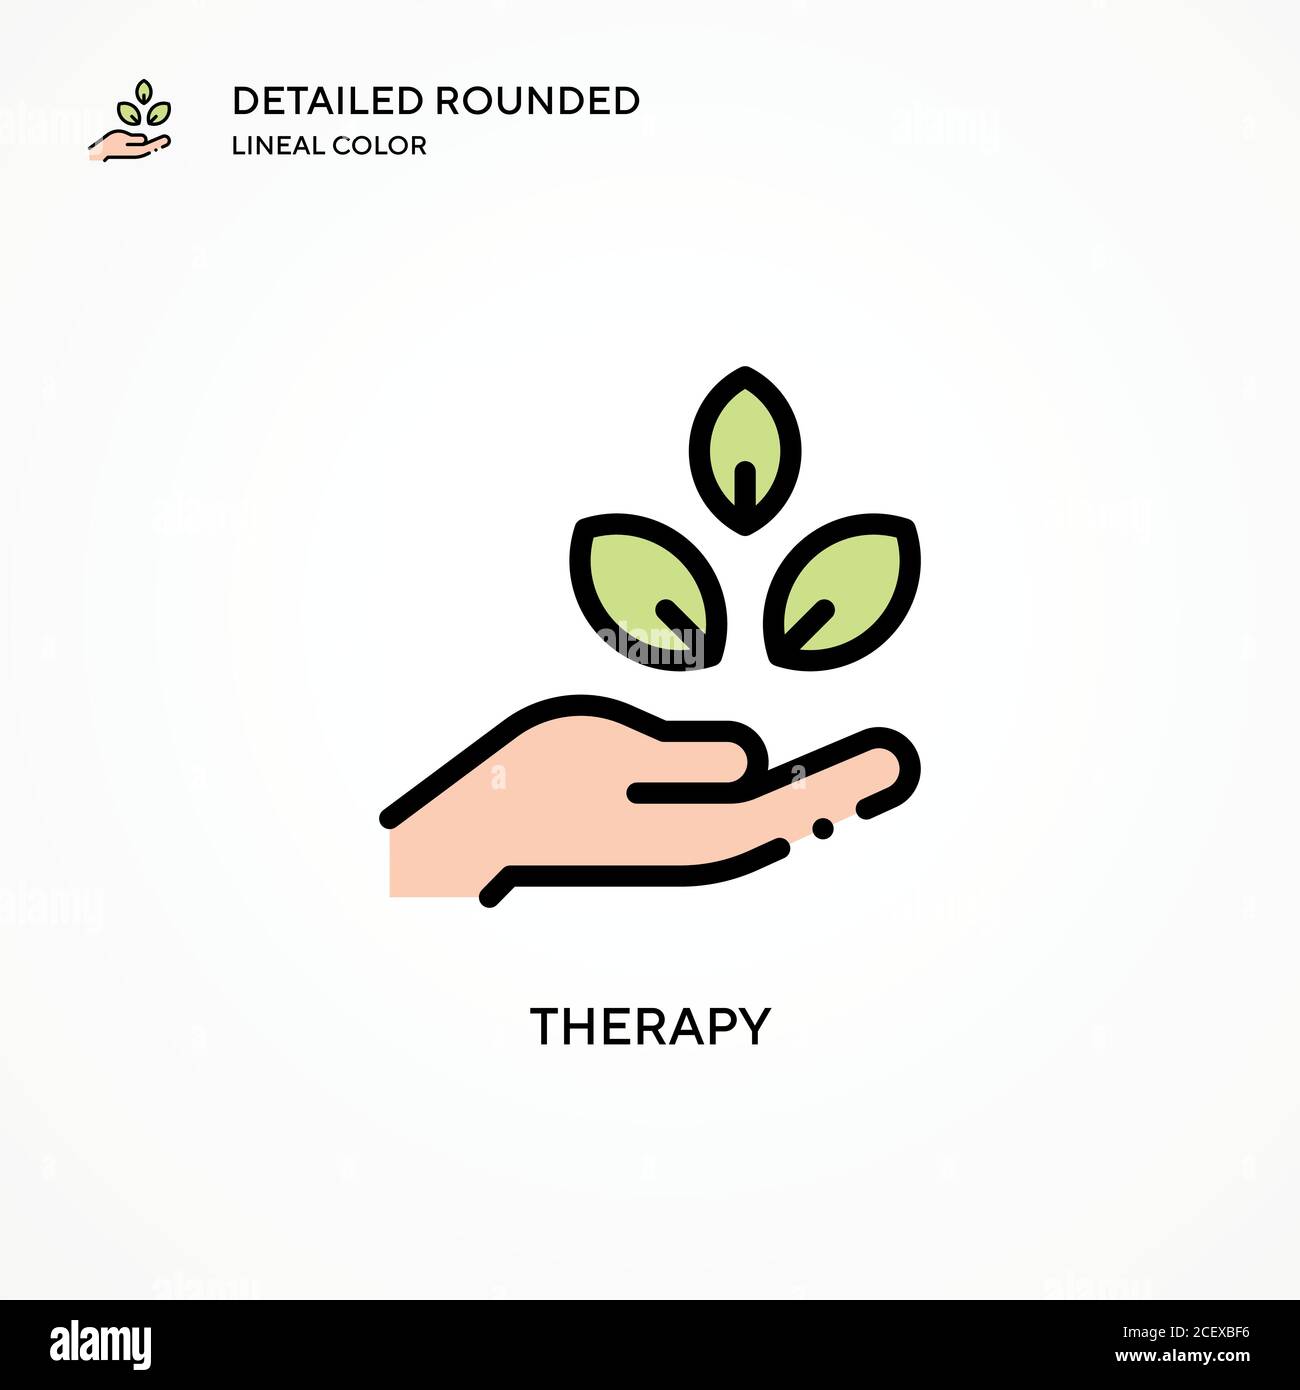 Therapy vector icon. Modern vector illustration concepts. Easy to edit and customize. Stock Vector